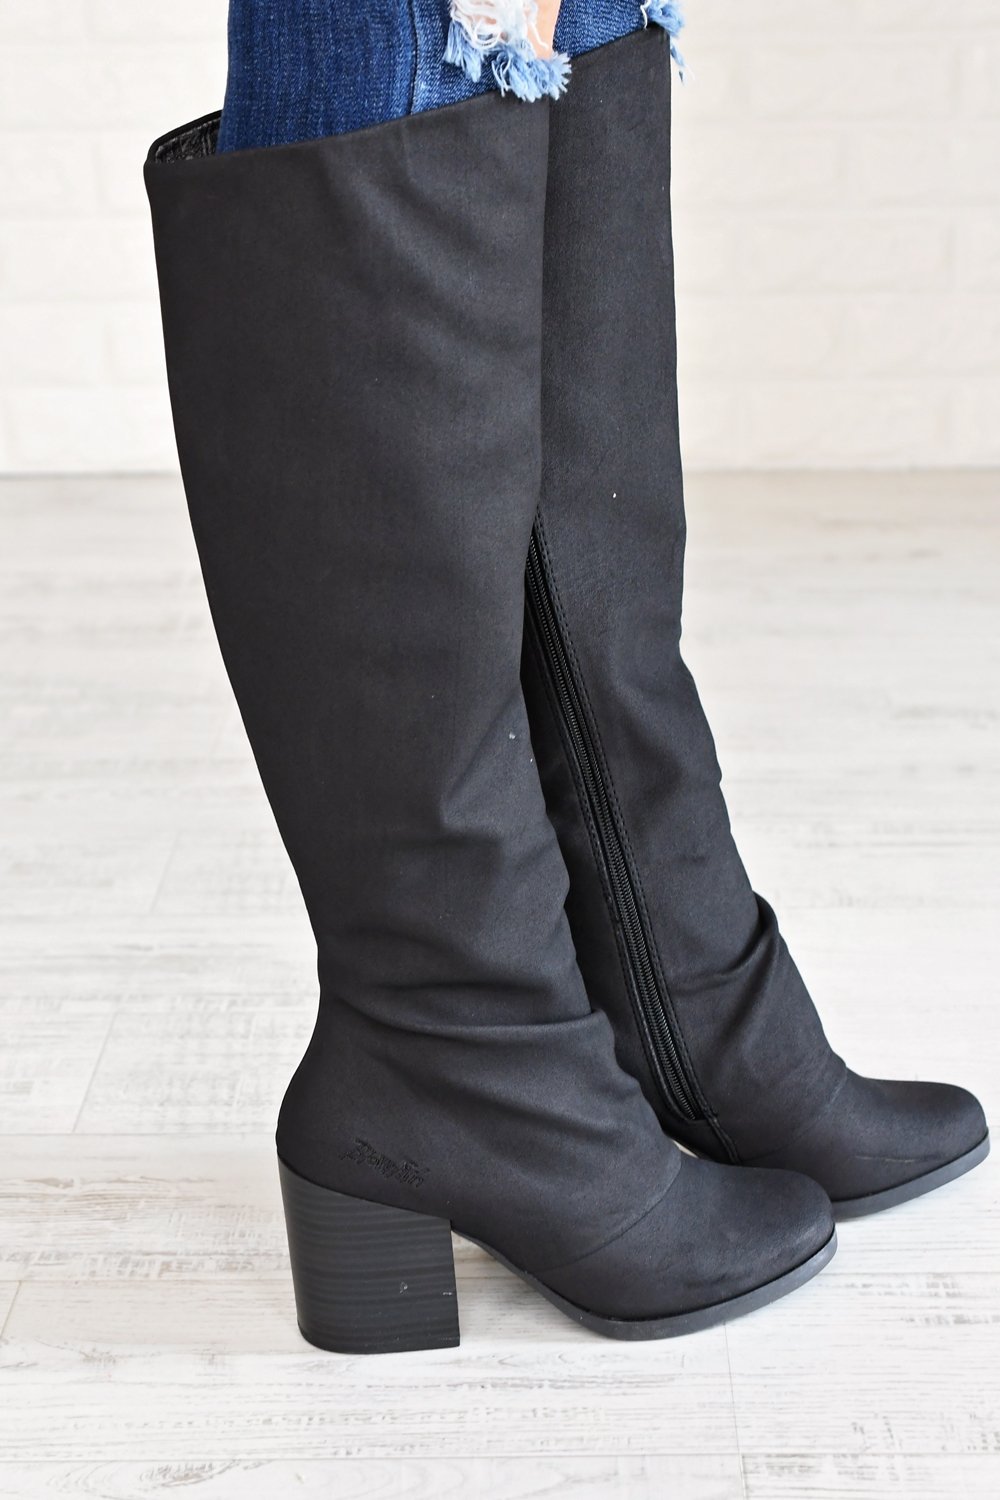 Dundee Boots ~ Black